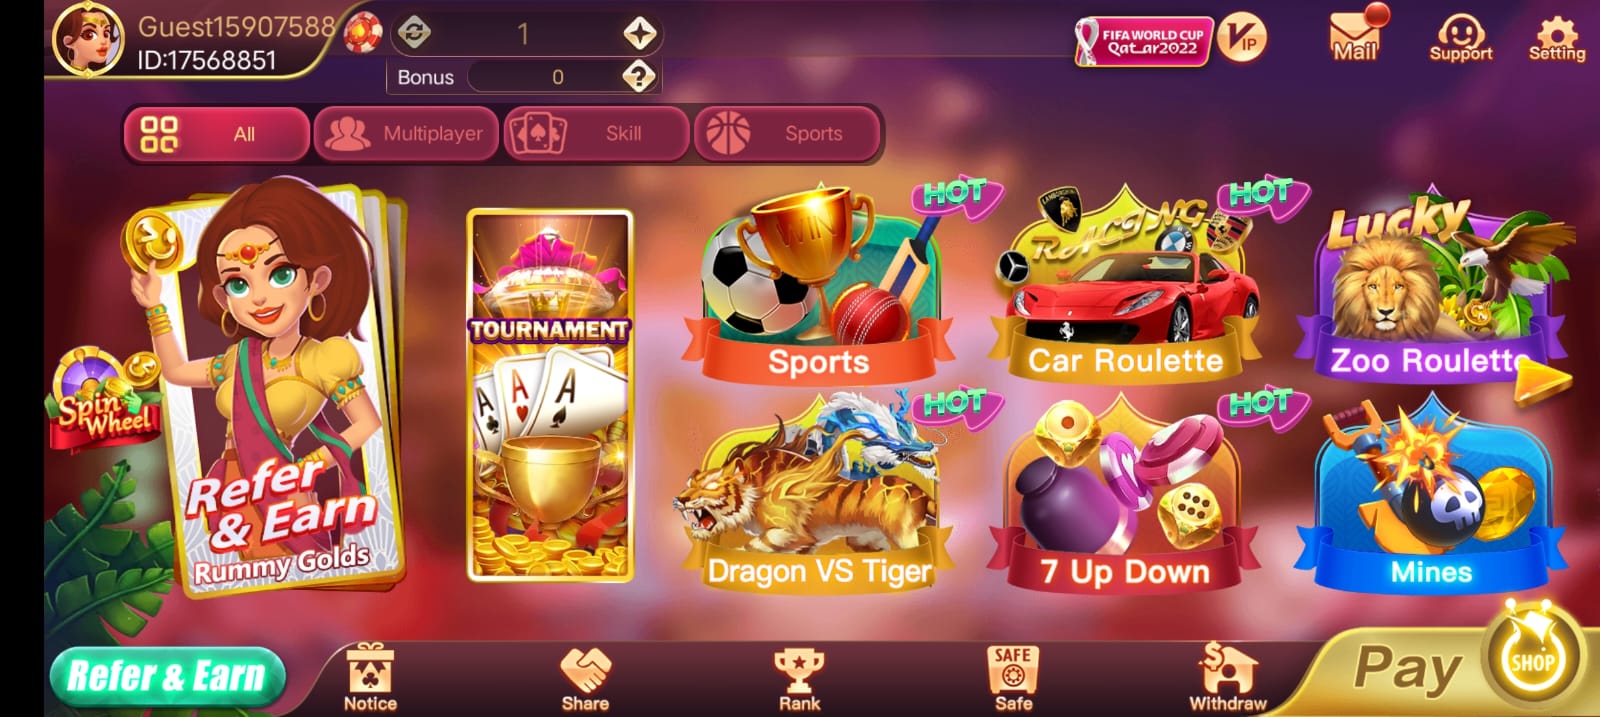 Available Game's In "Rummy Golds Apk'' 